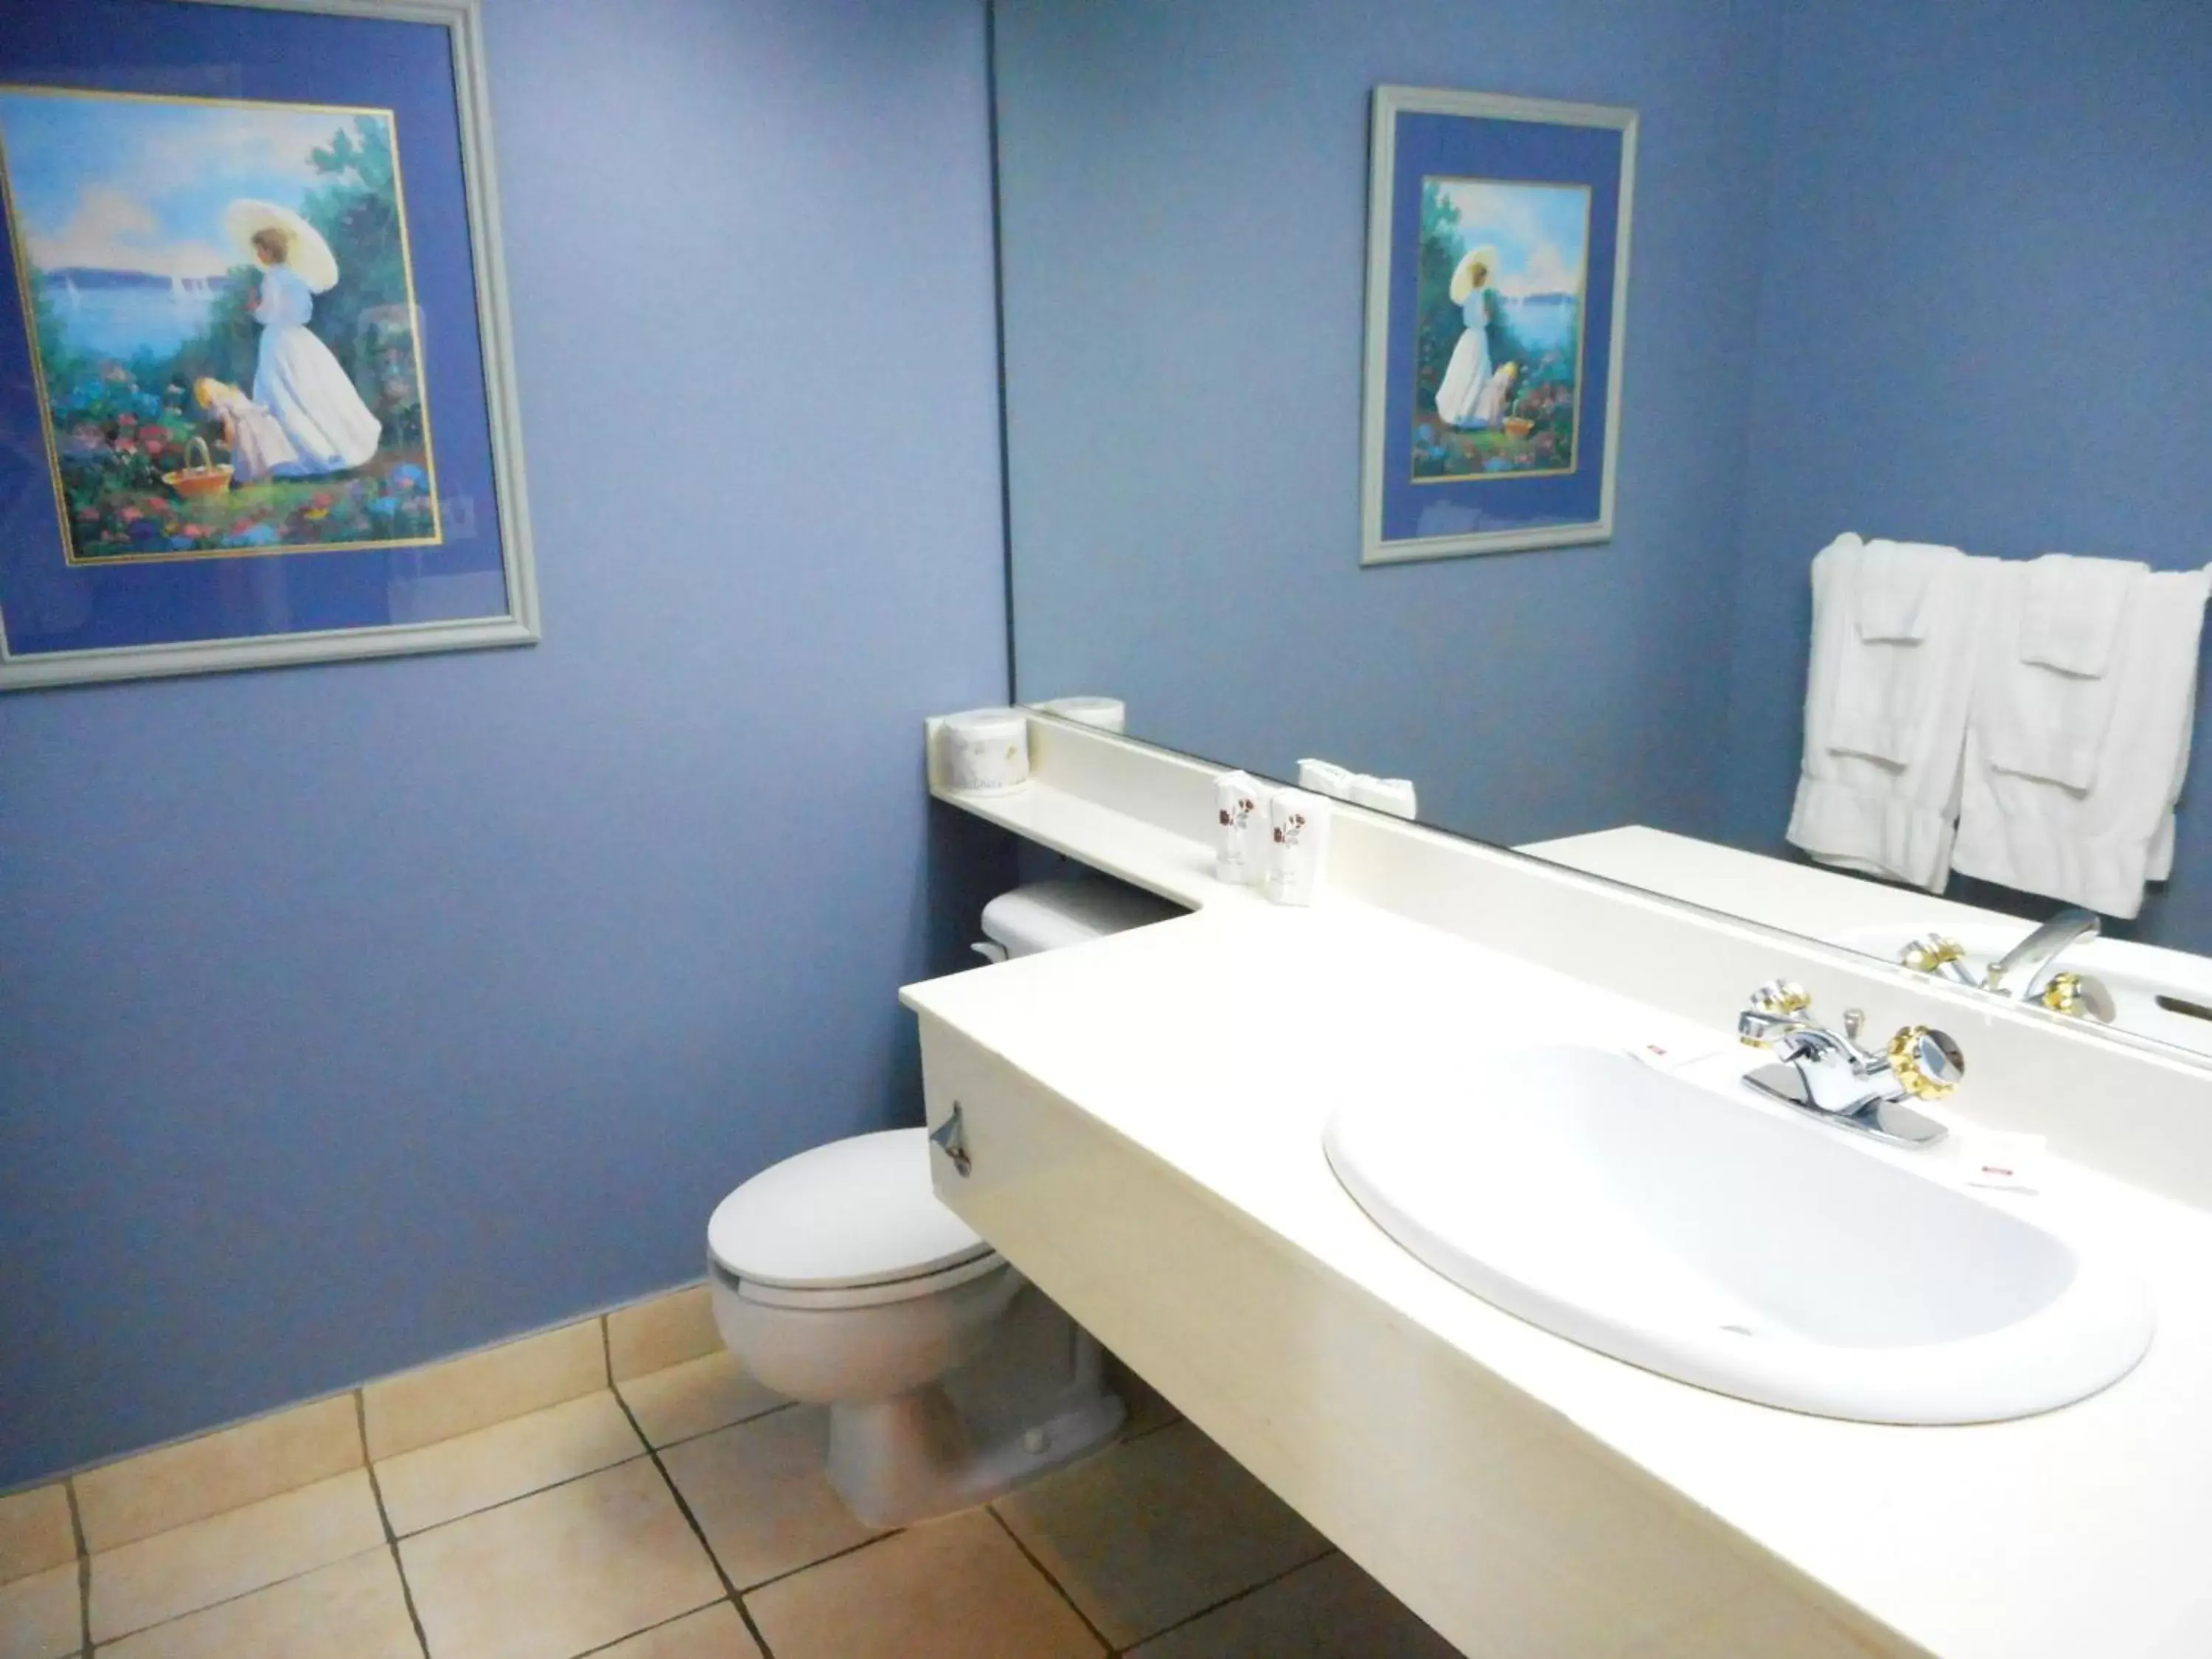 Bathroom in Chateau Repotel Duplessis Airport